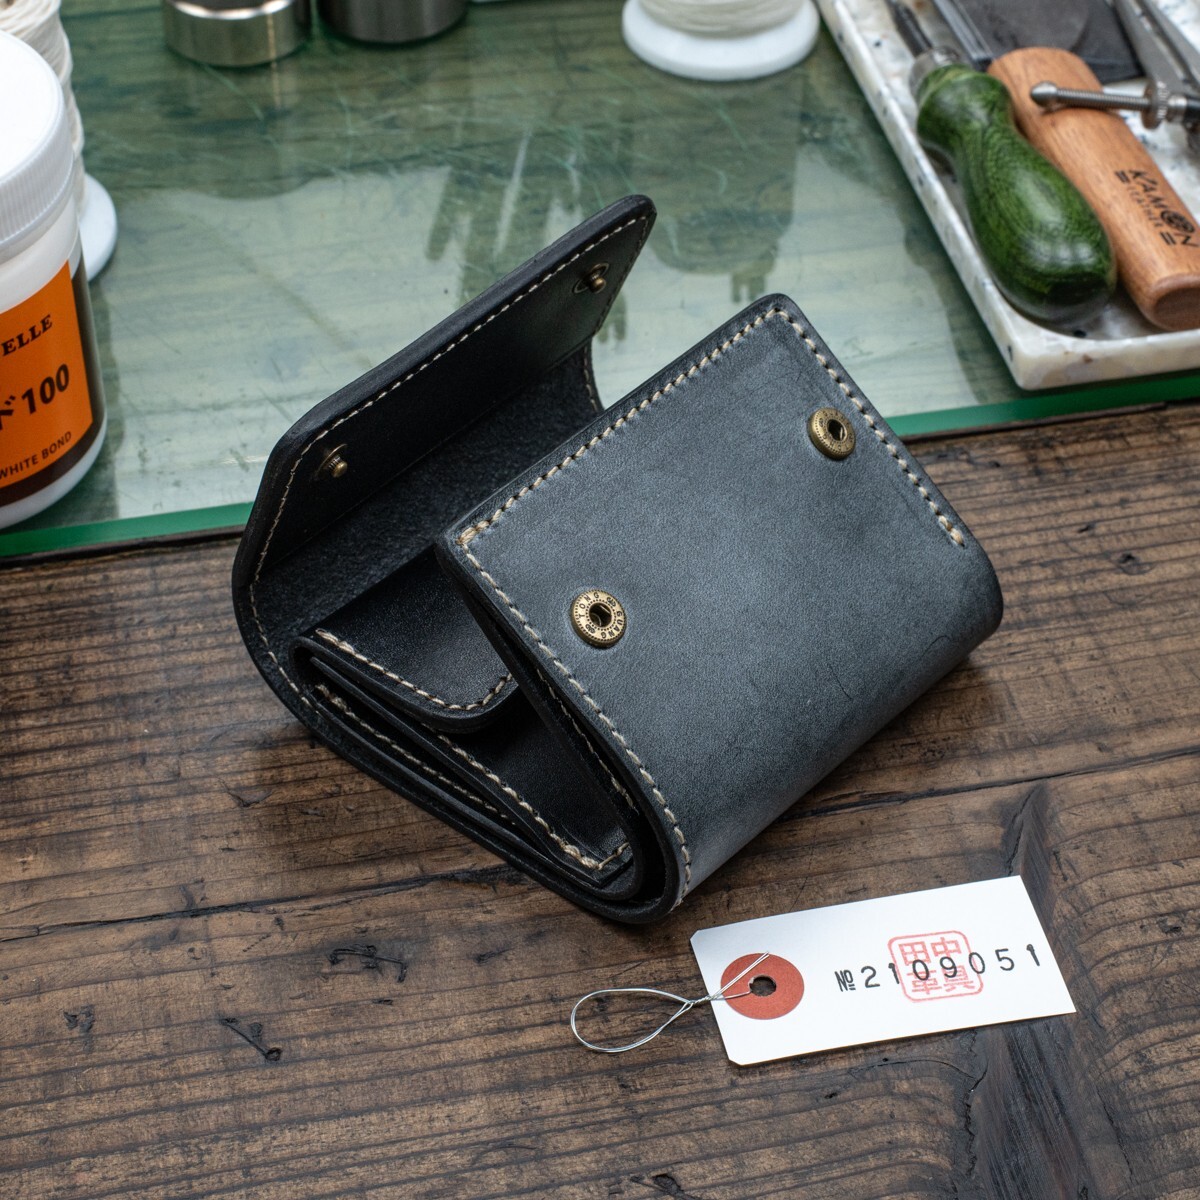 [ the truth thing photographing ] new goods original leather b ride ru leather men's three folding folding twice purse unused free shipping 1 jpy hand made black black rice field middle leather .